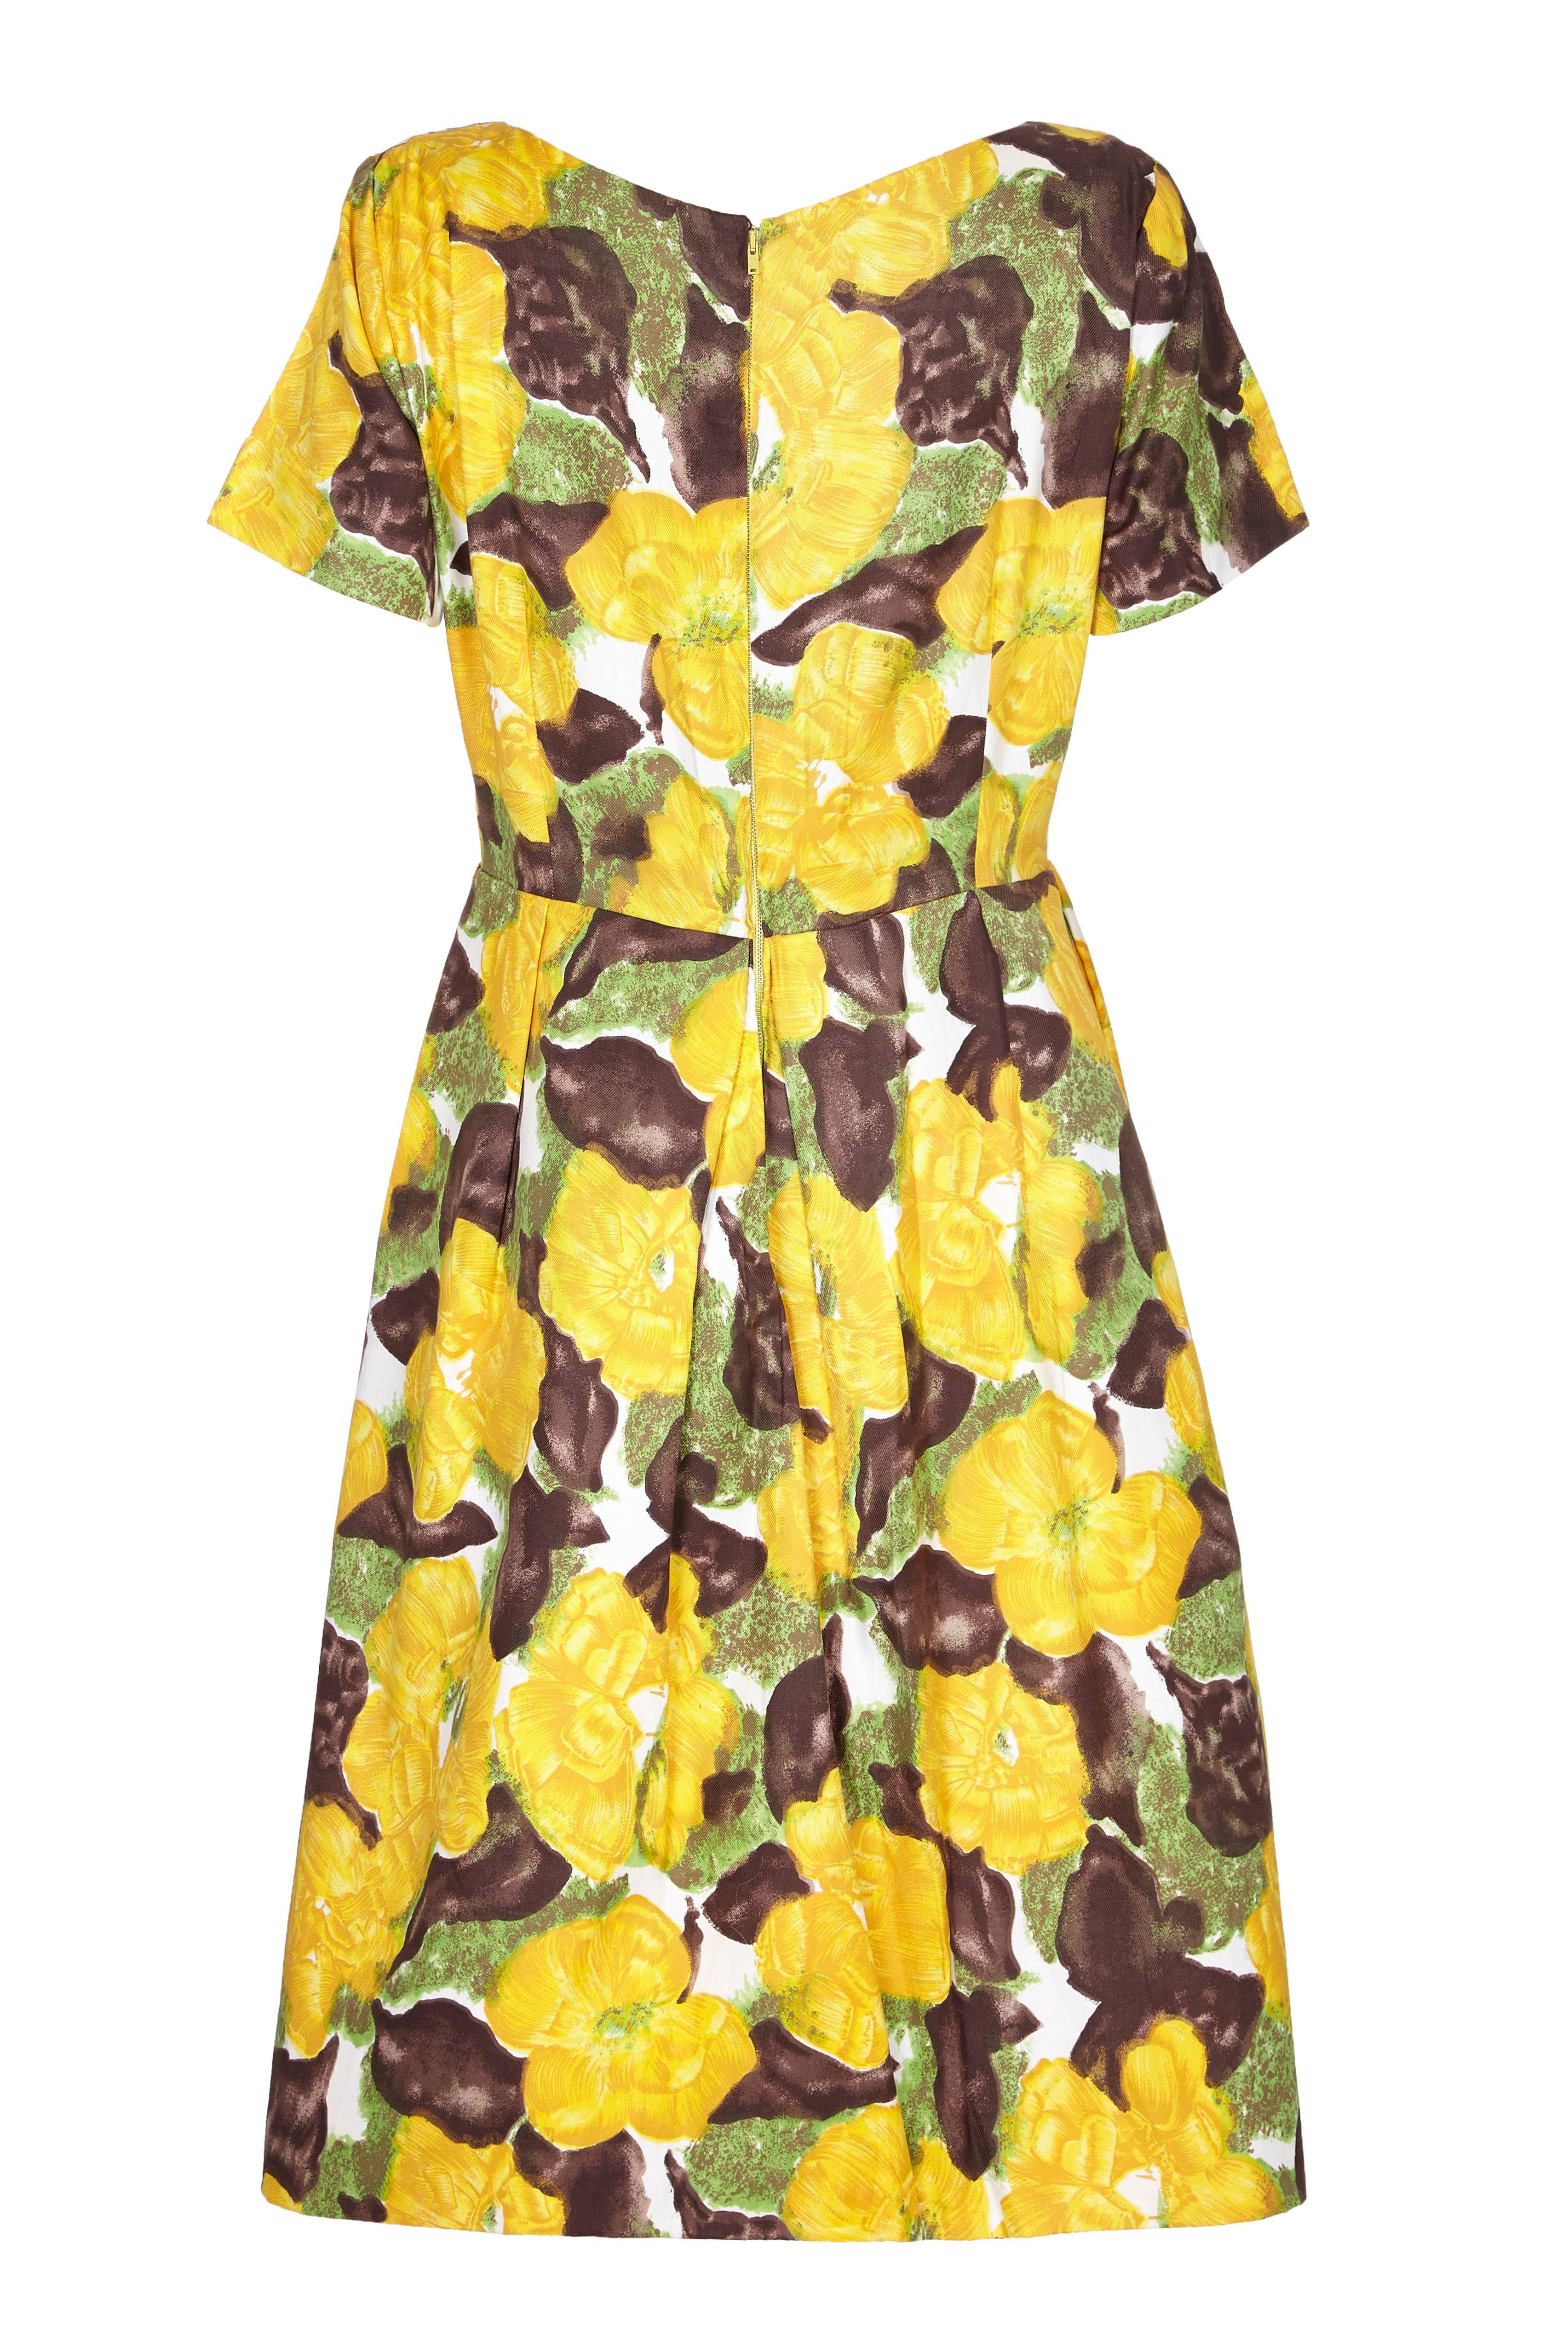 Lovely vintage 1950s cotton dress by British couture designer Patricia Anne with large yellow, green and brown floral print.  This dress features short sleeves, full skirt, pleated at the waist and a zip to fasten at the back. A great, beautifully